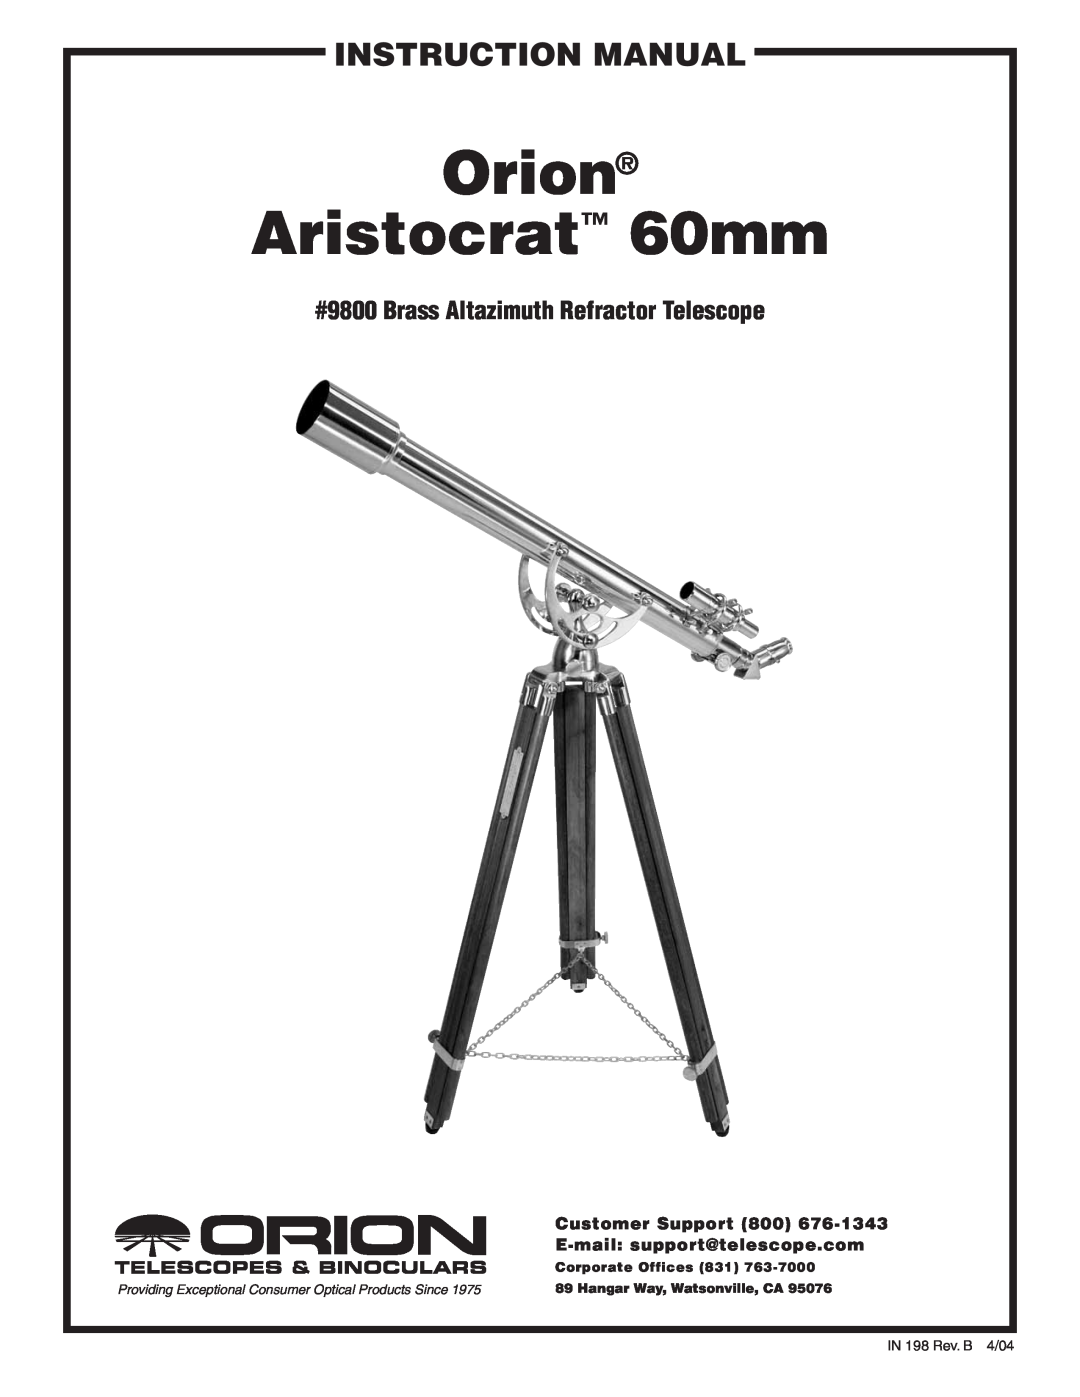 Orion instruction manual #9800 Brass Altazimuth Refractor Telescope, Customer Support, E-mail support@telescope.com 